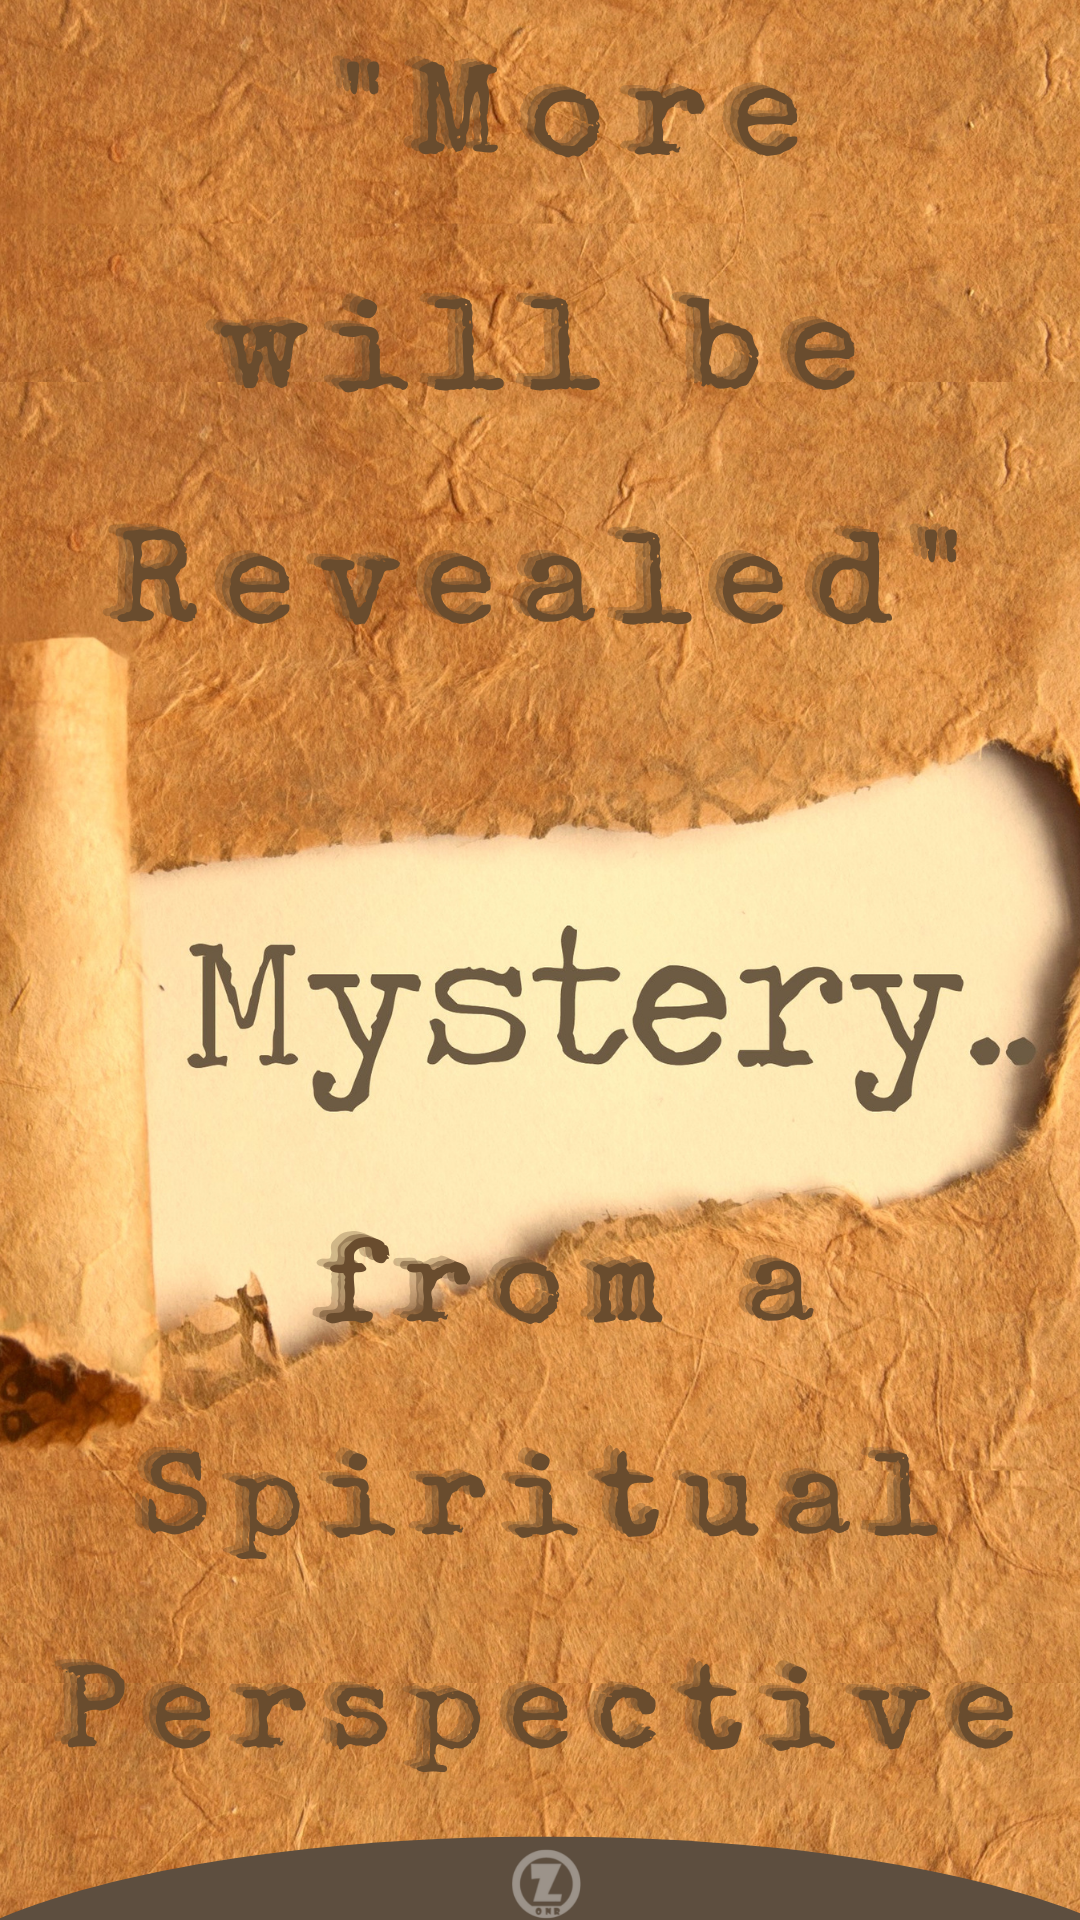 Read more about the article “More will be Revealed” The Mystery from a Spiritual Perspective – Step 3